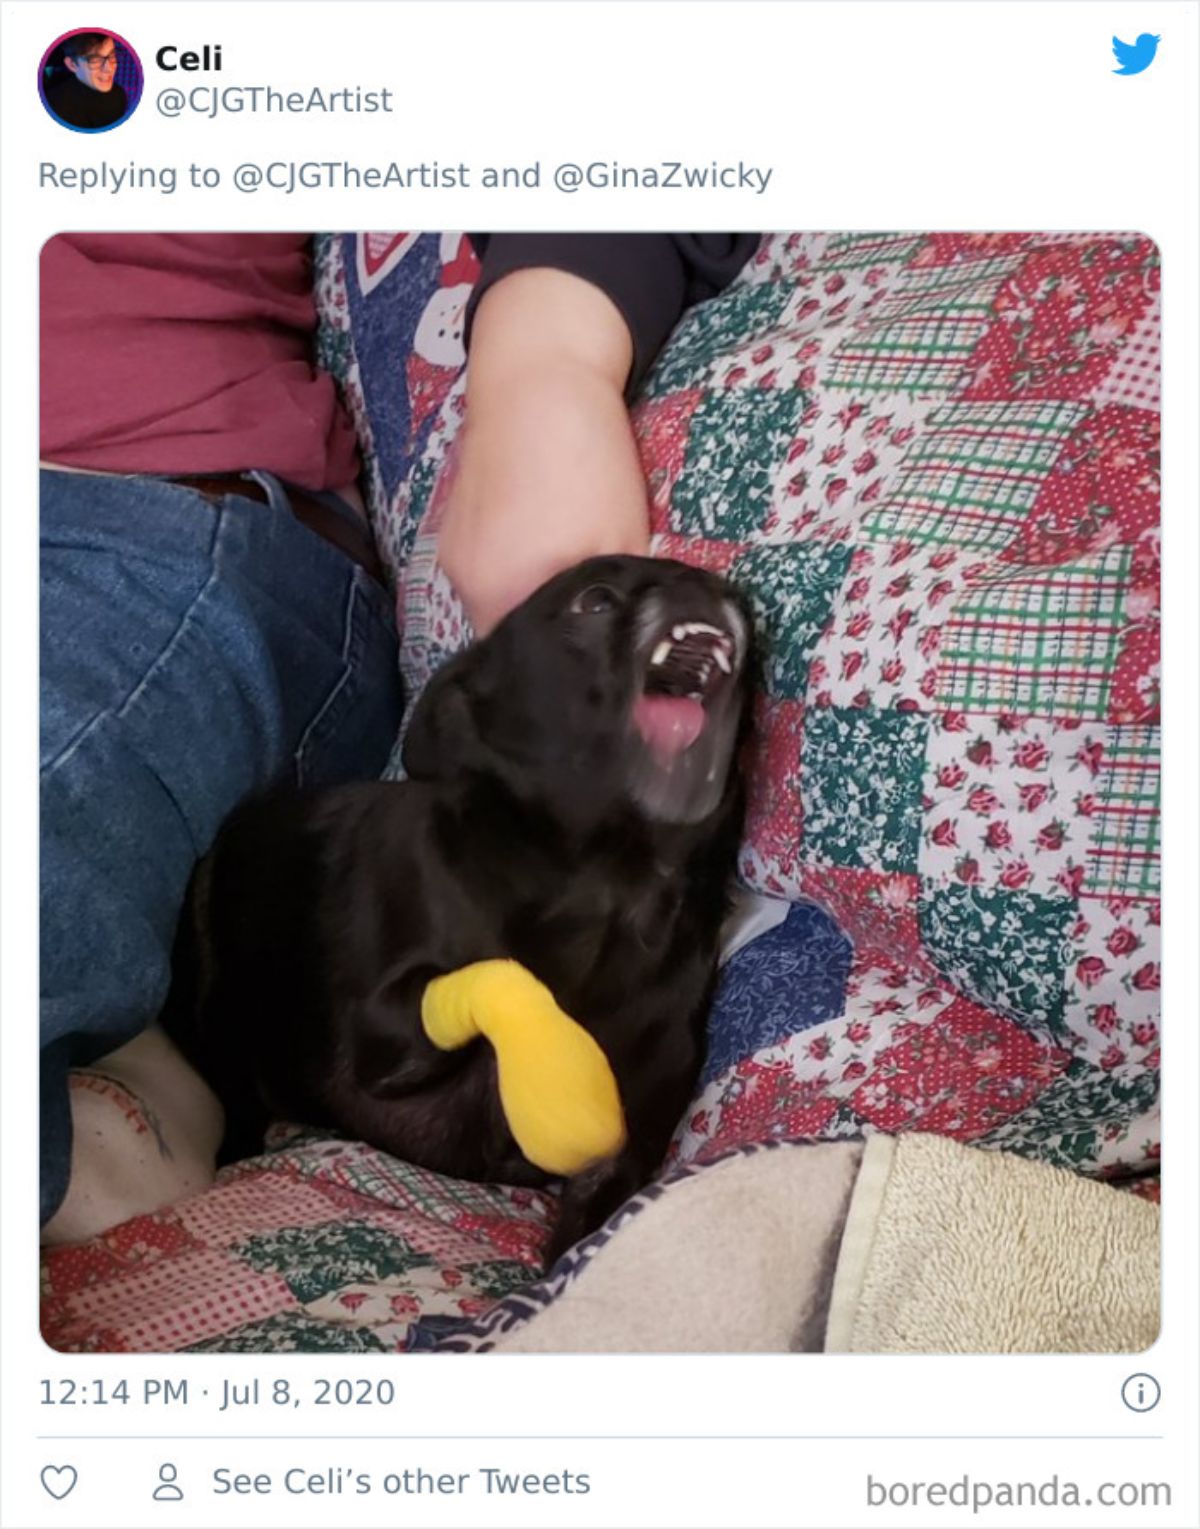 tweet of a black dog laying on a colourful blanket next to a person and the dog is csreaming with a yellow bandage on its front paw